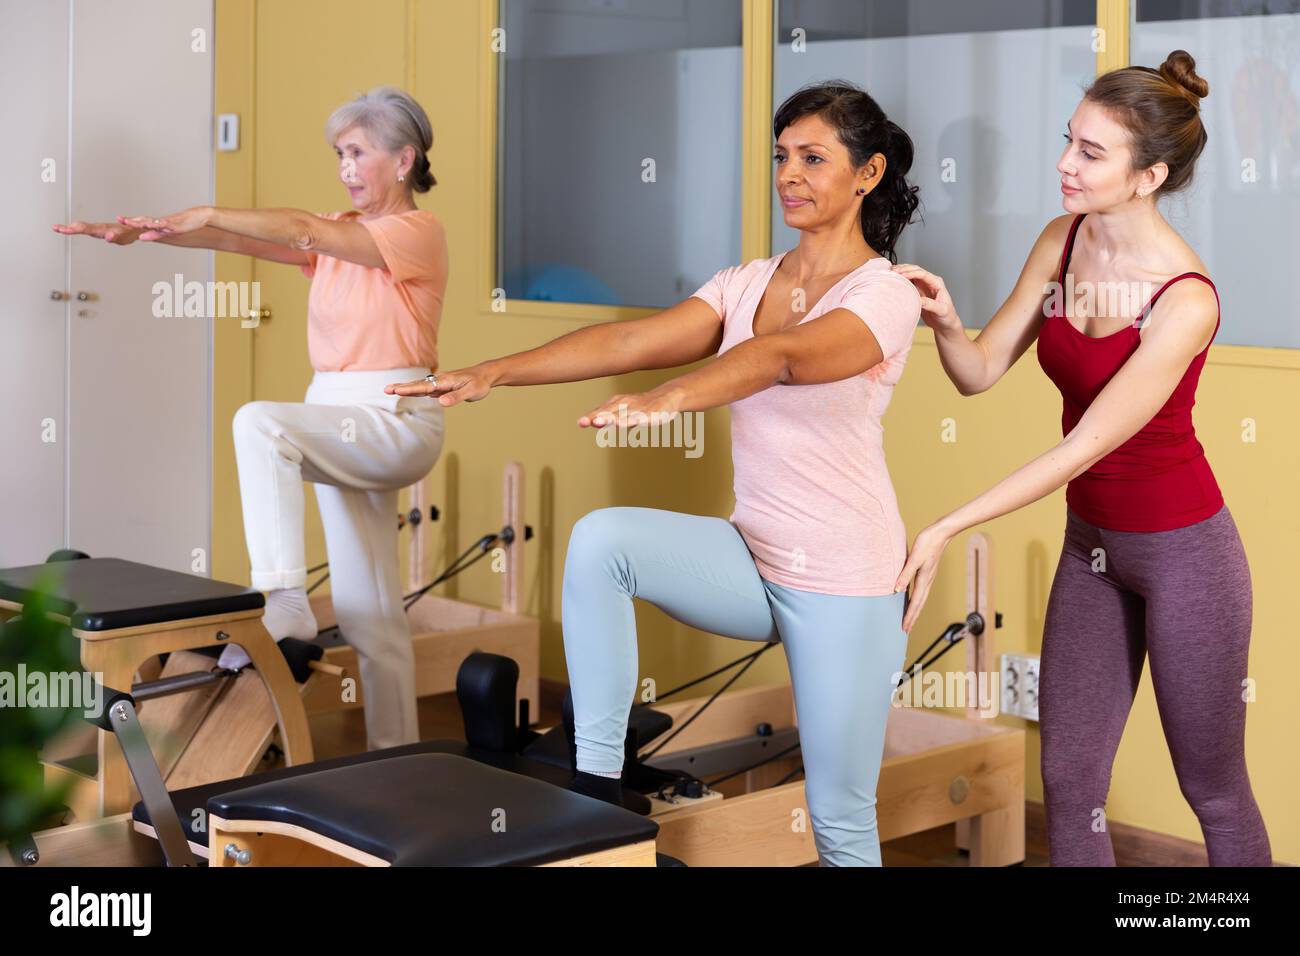 Young woman practicing pilates stretching exercises on combo chair